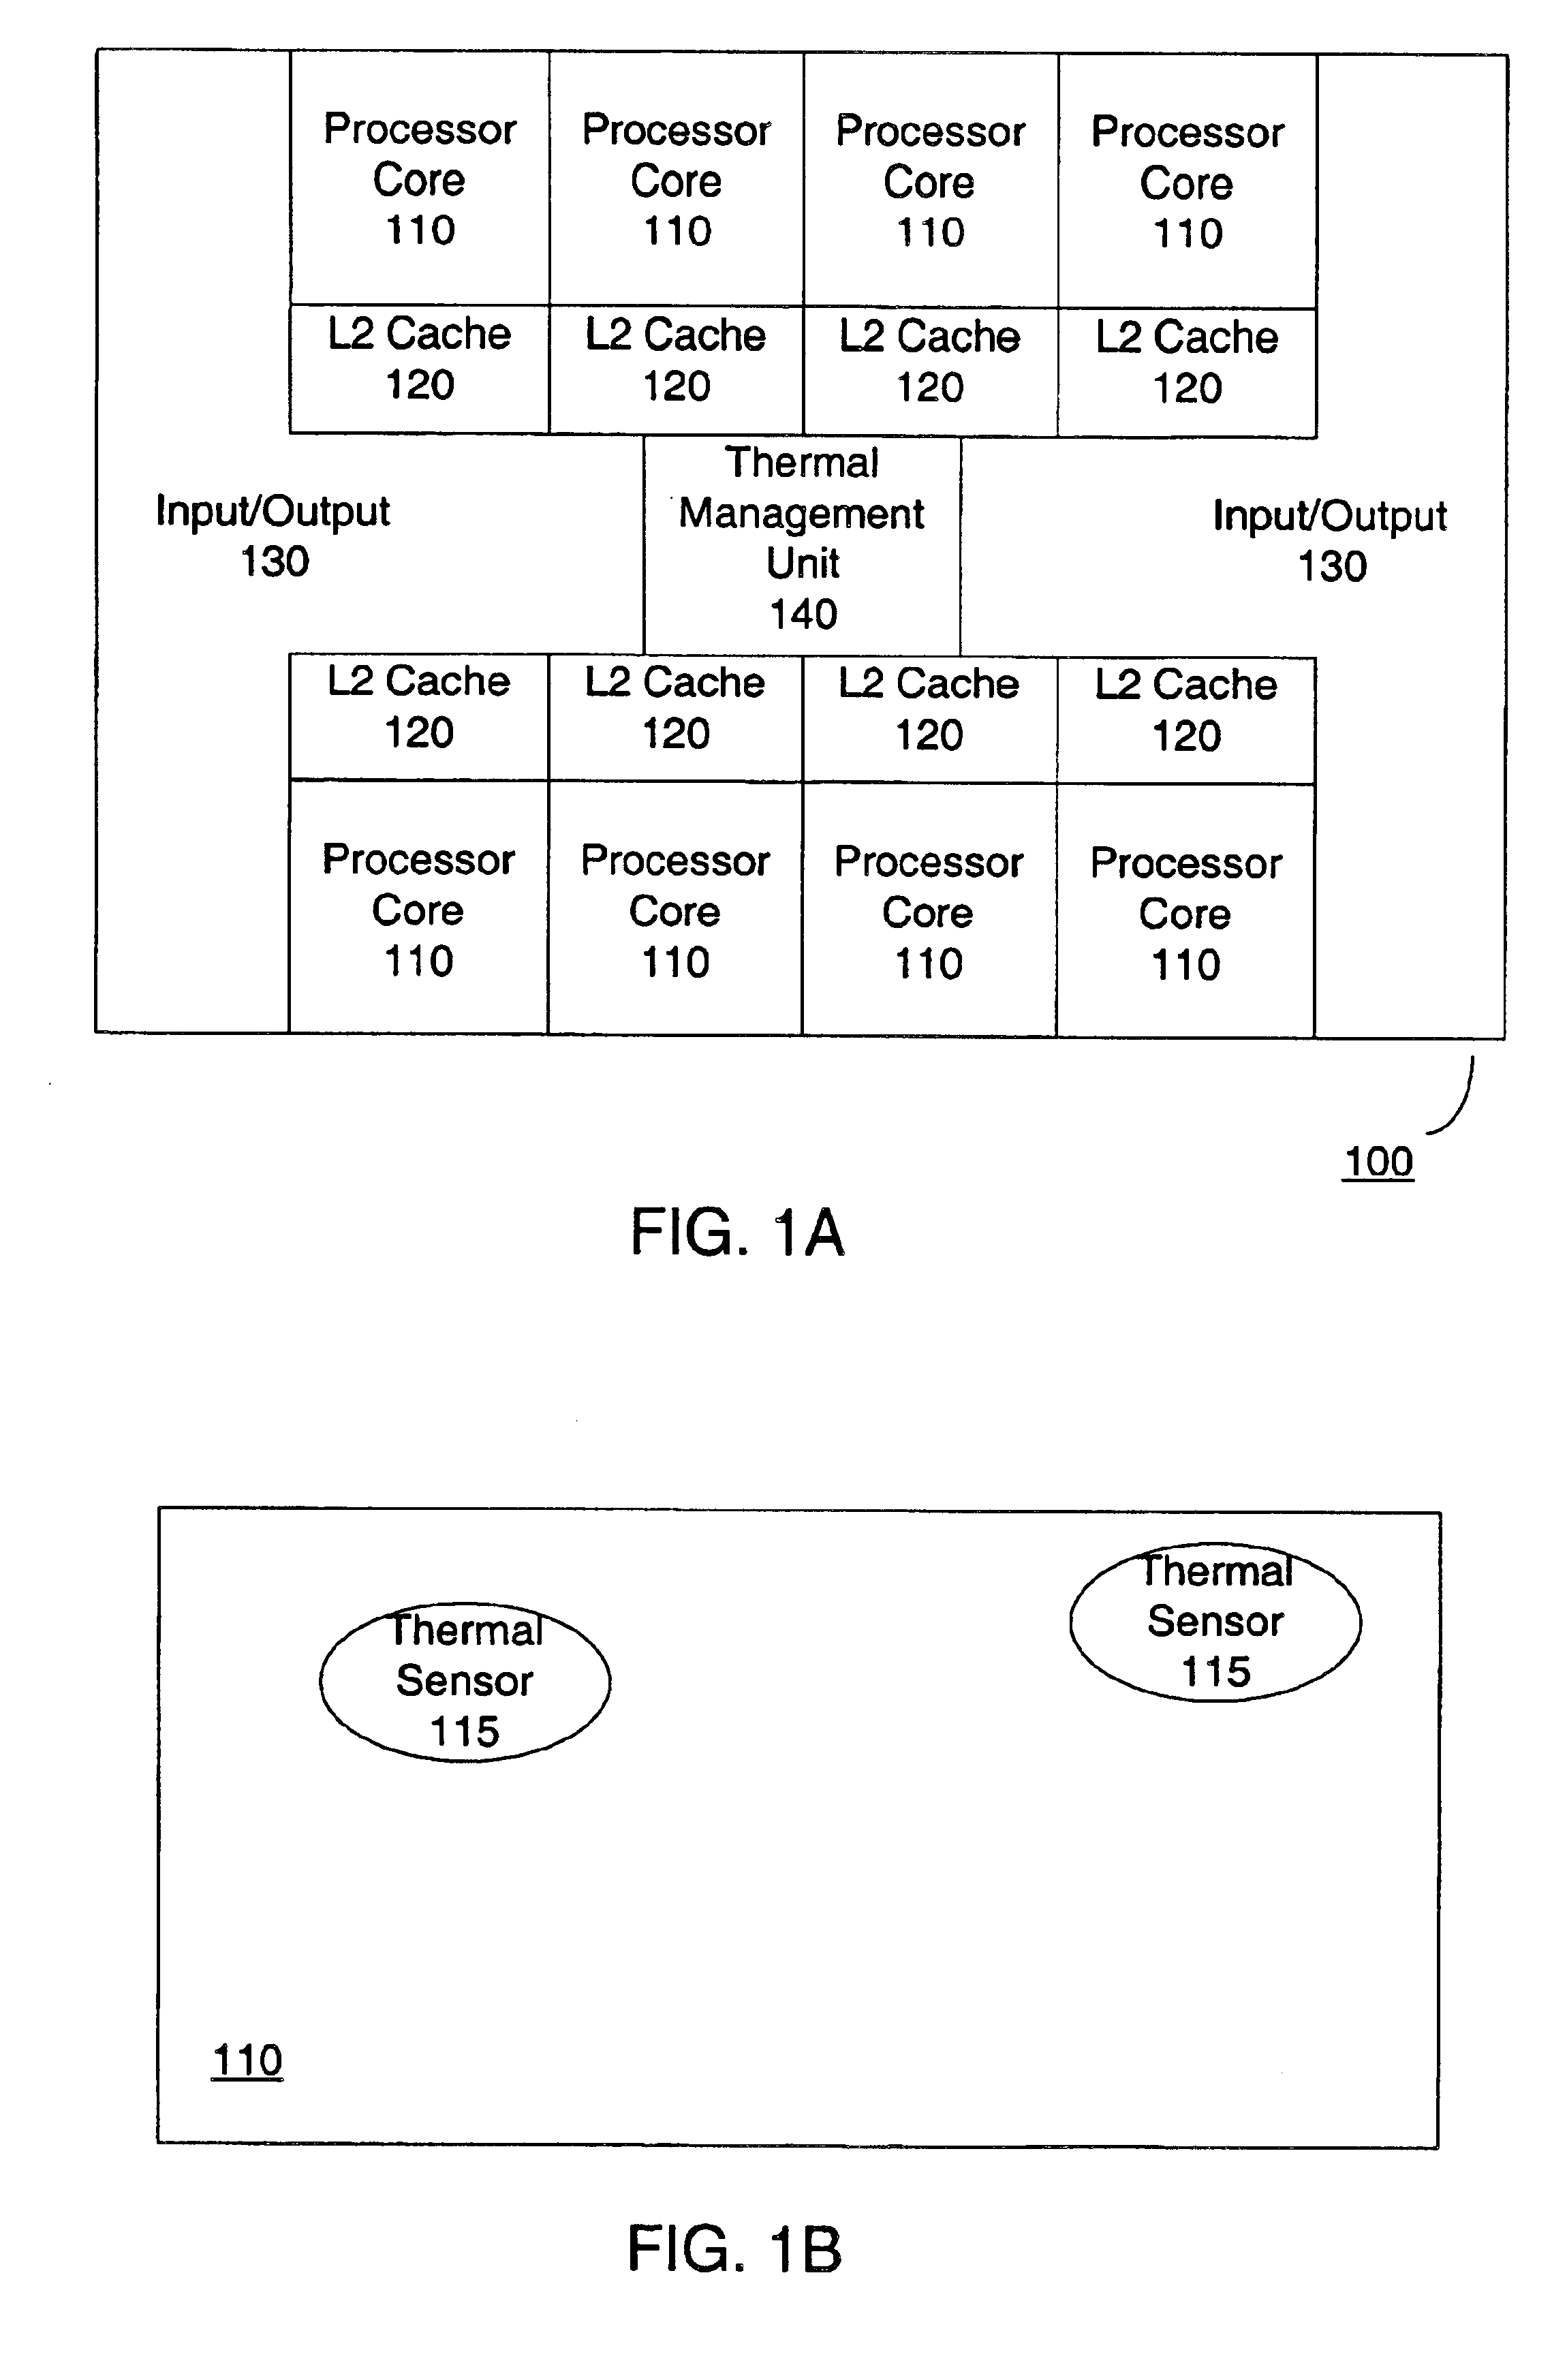 Apparatus for thermal management of multiple core microprocessors